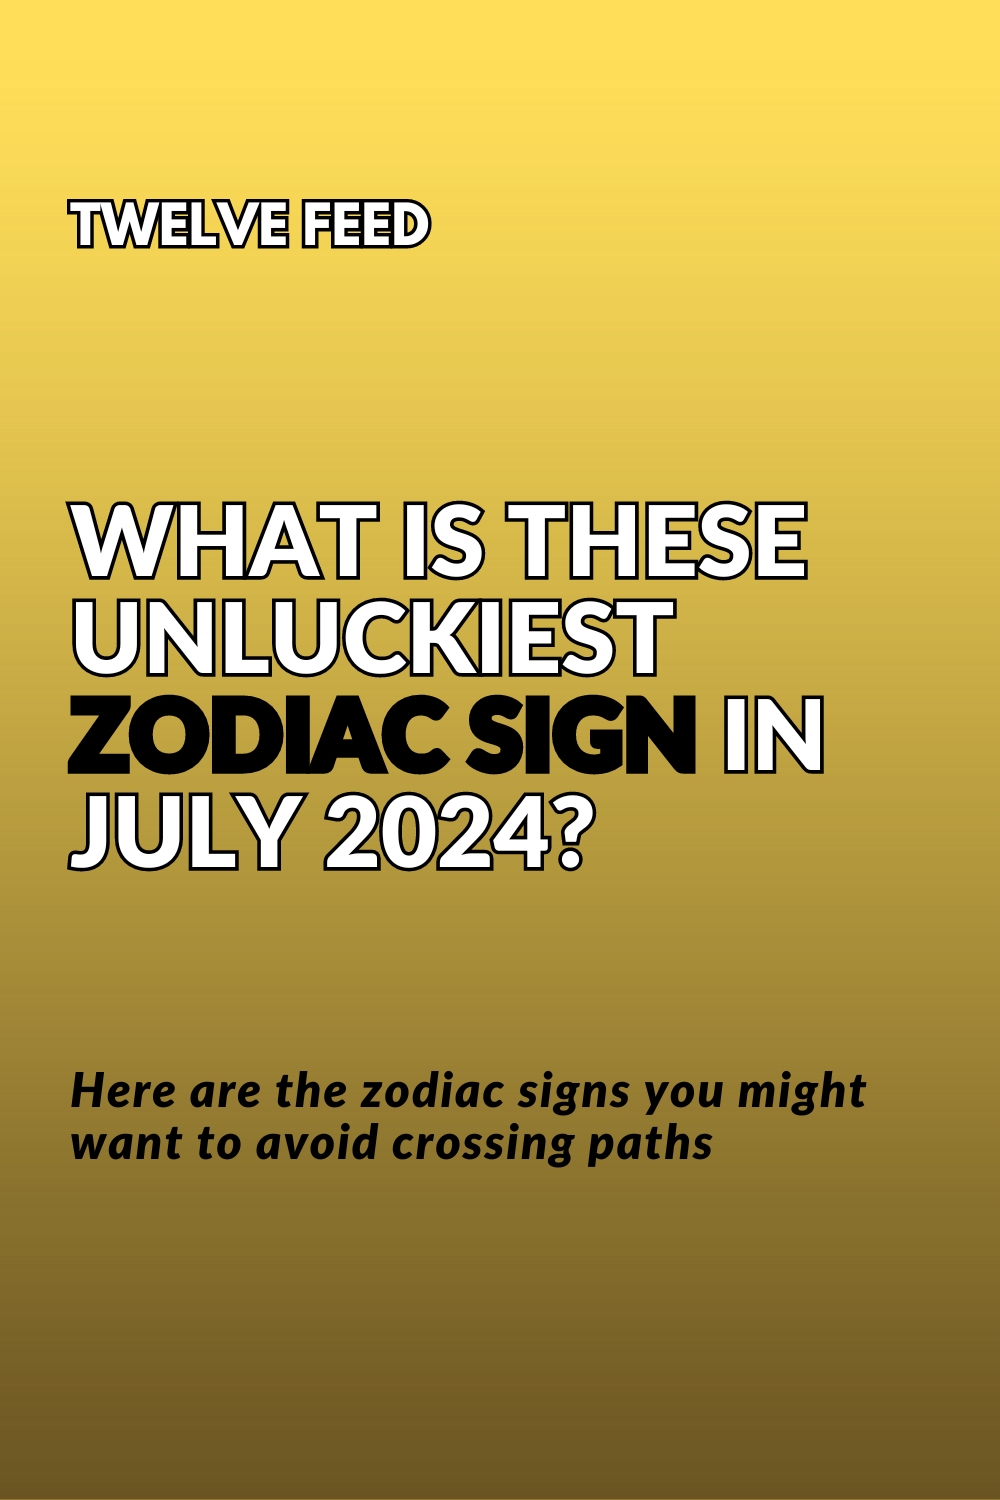 What Is These Unluckiest Zodiac Sign In July 2024?